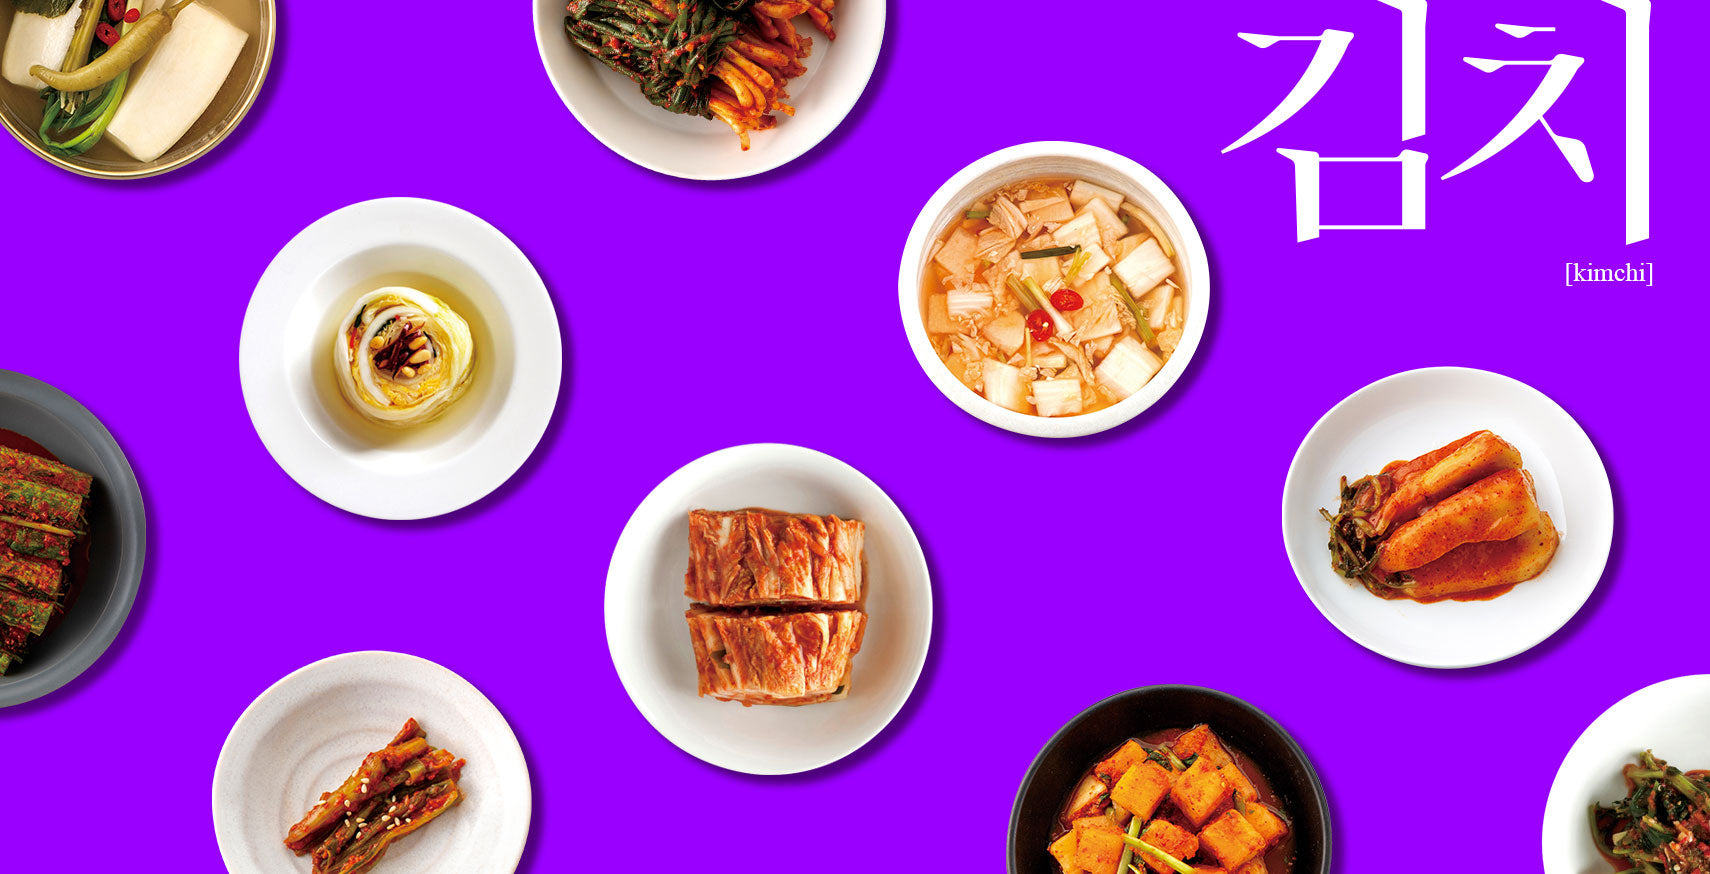 The Meaning of Kimchi: How Did Kimchi Become So Special to Koreans?